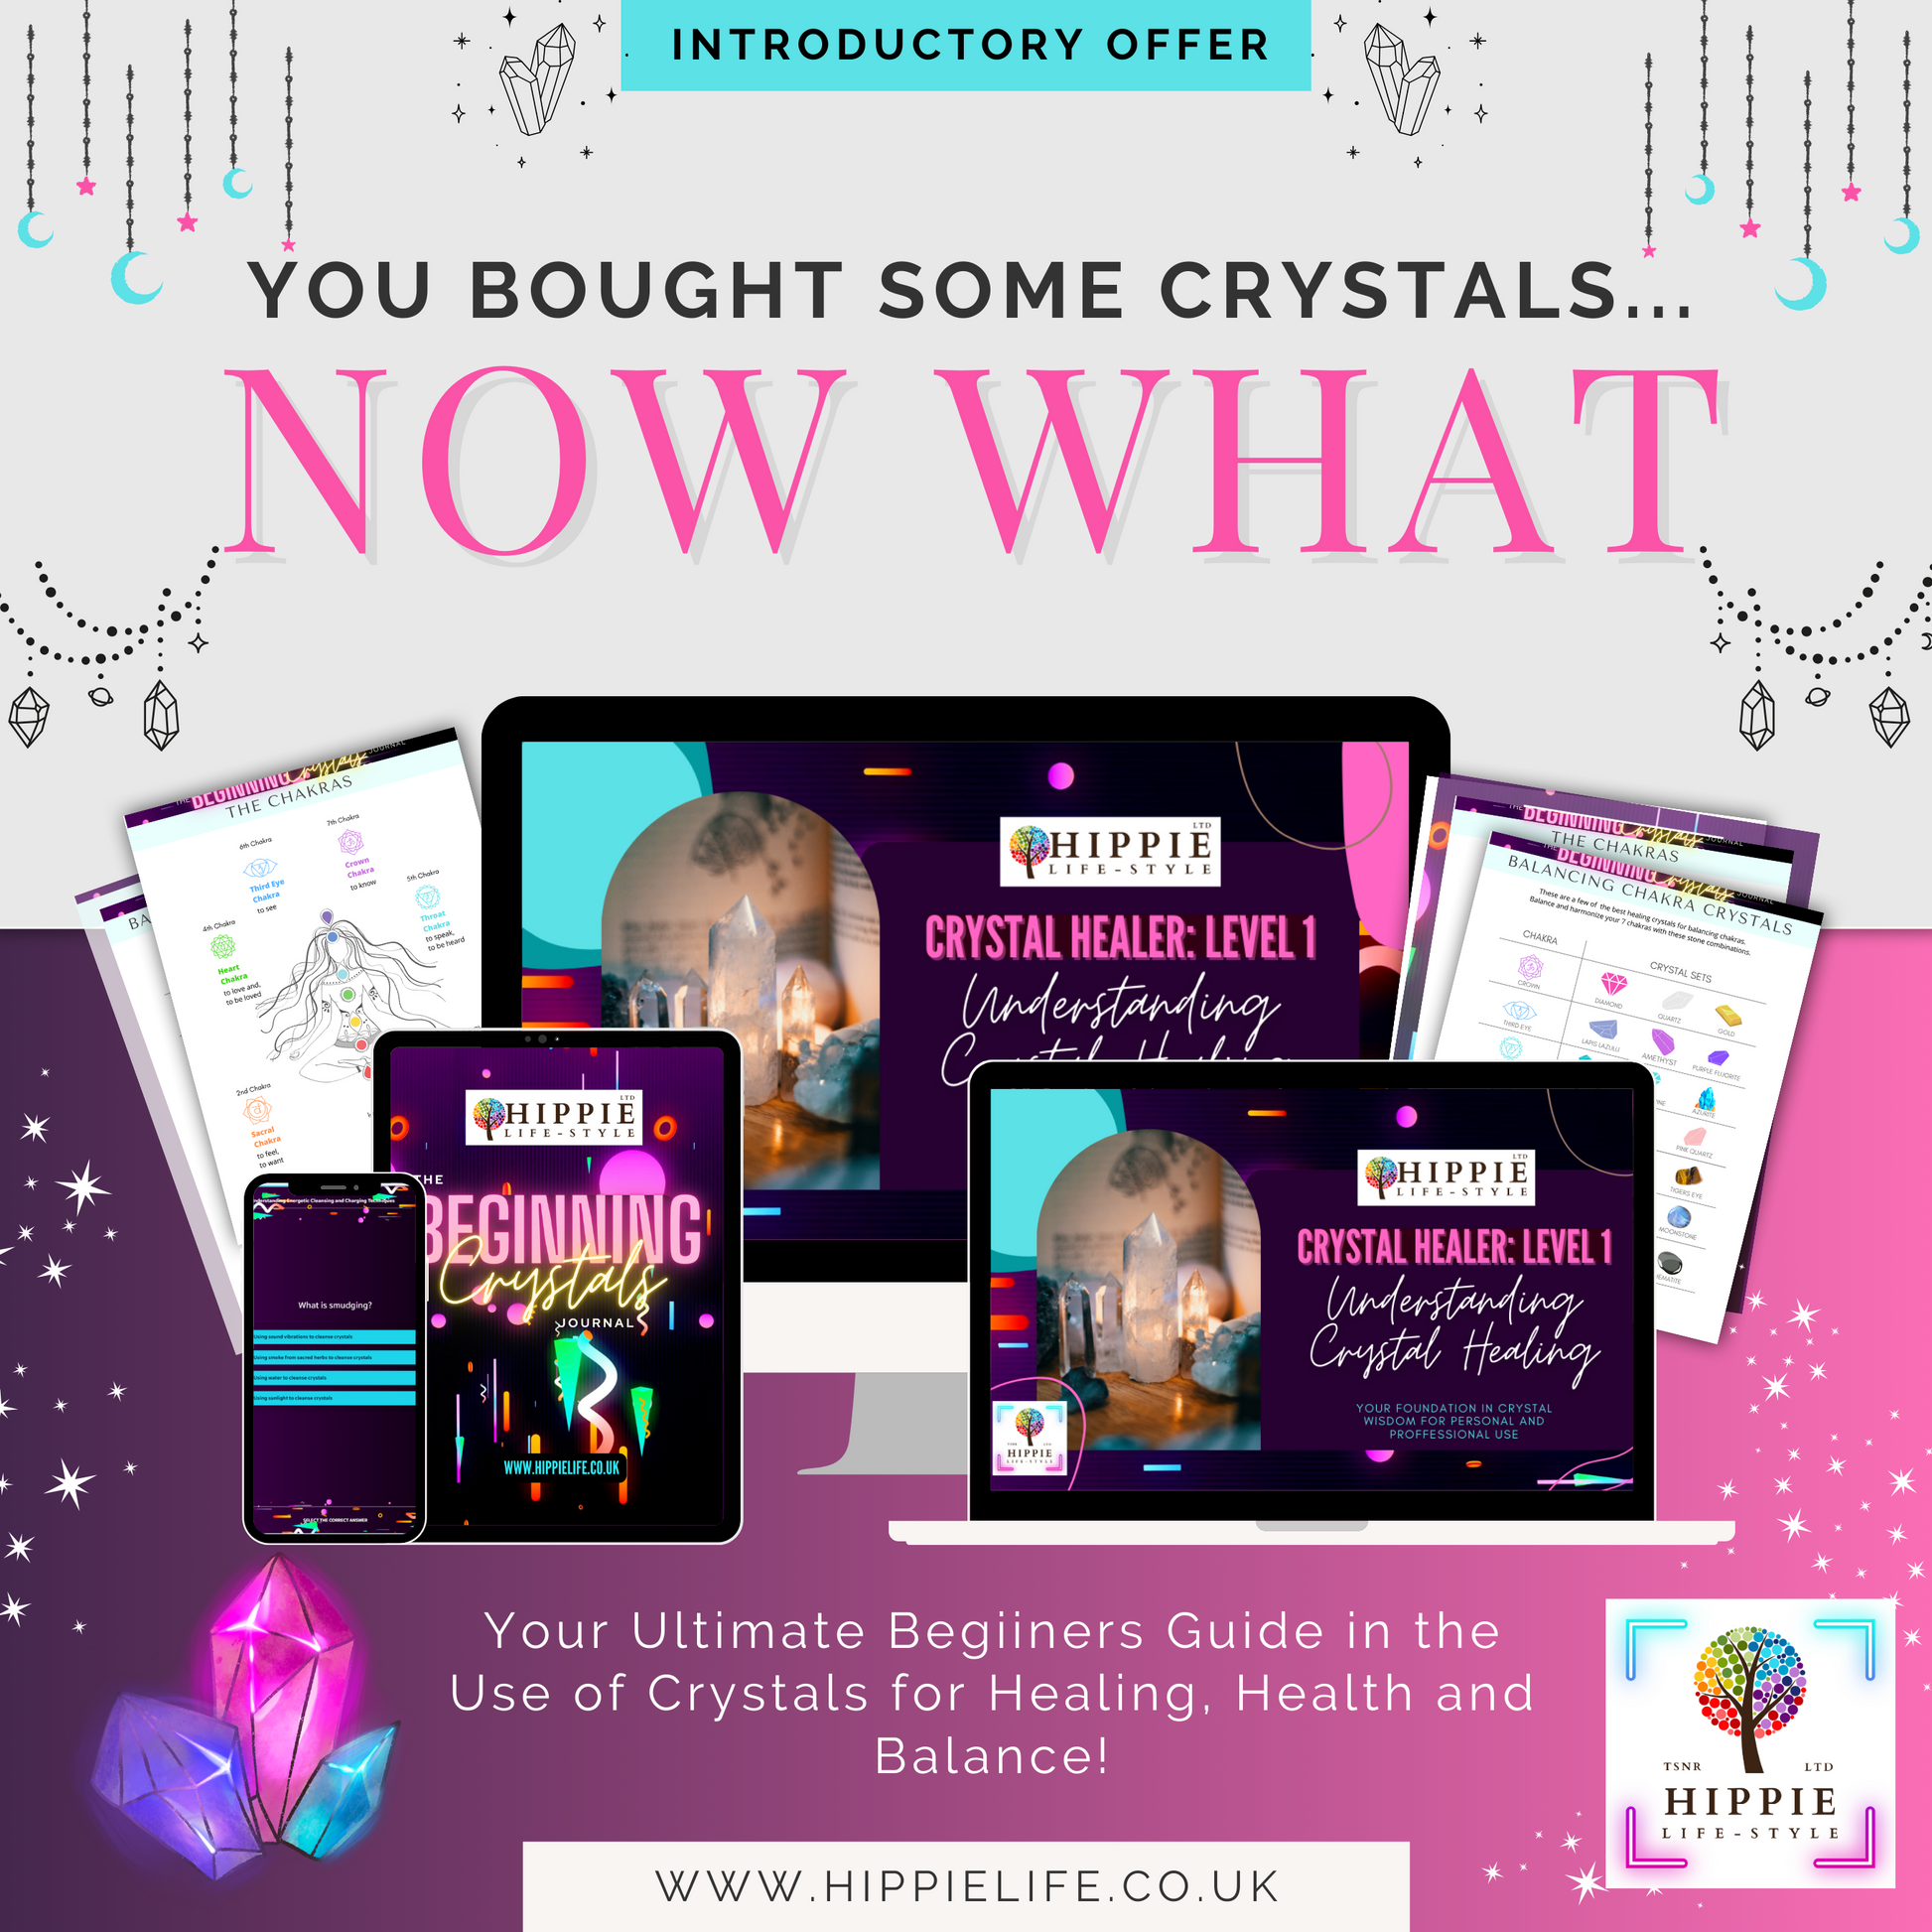 Hippie life UK, the crystal, spiritual and natural holistic health gift shop presents HIPPIE Crystal Healer Level 1 Interactive Online Course and Workbook Journal!, , HIPPIE Life UK, , , , , .